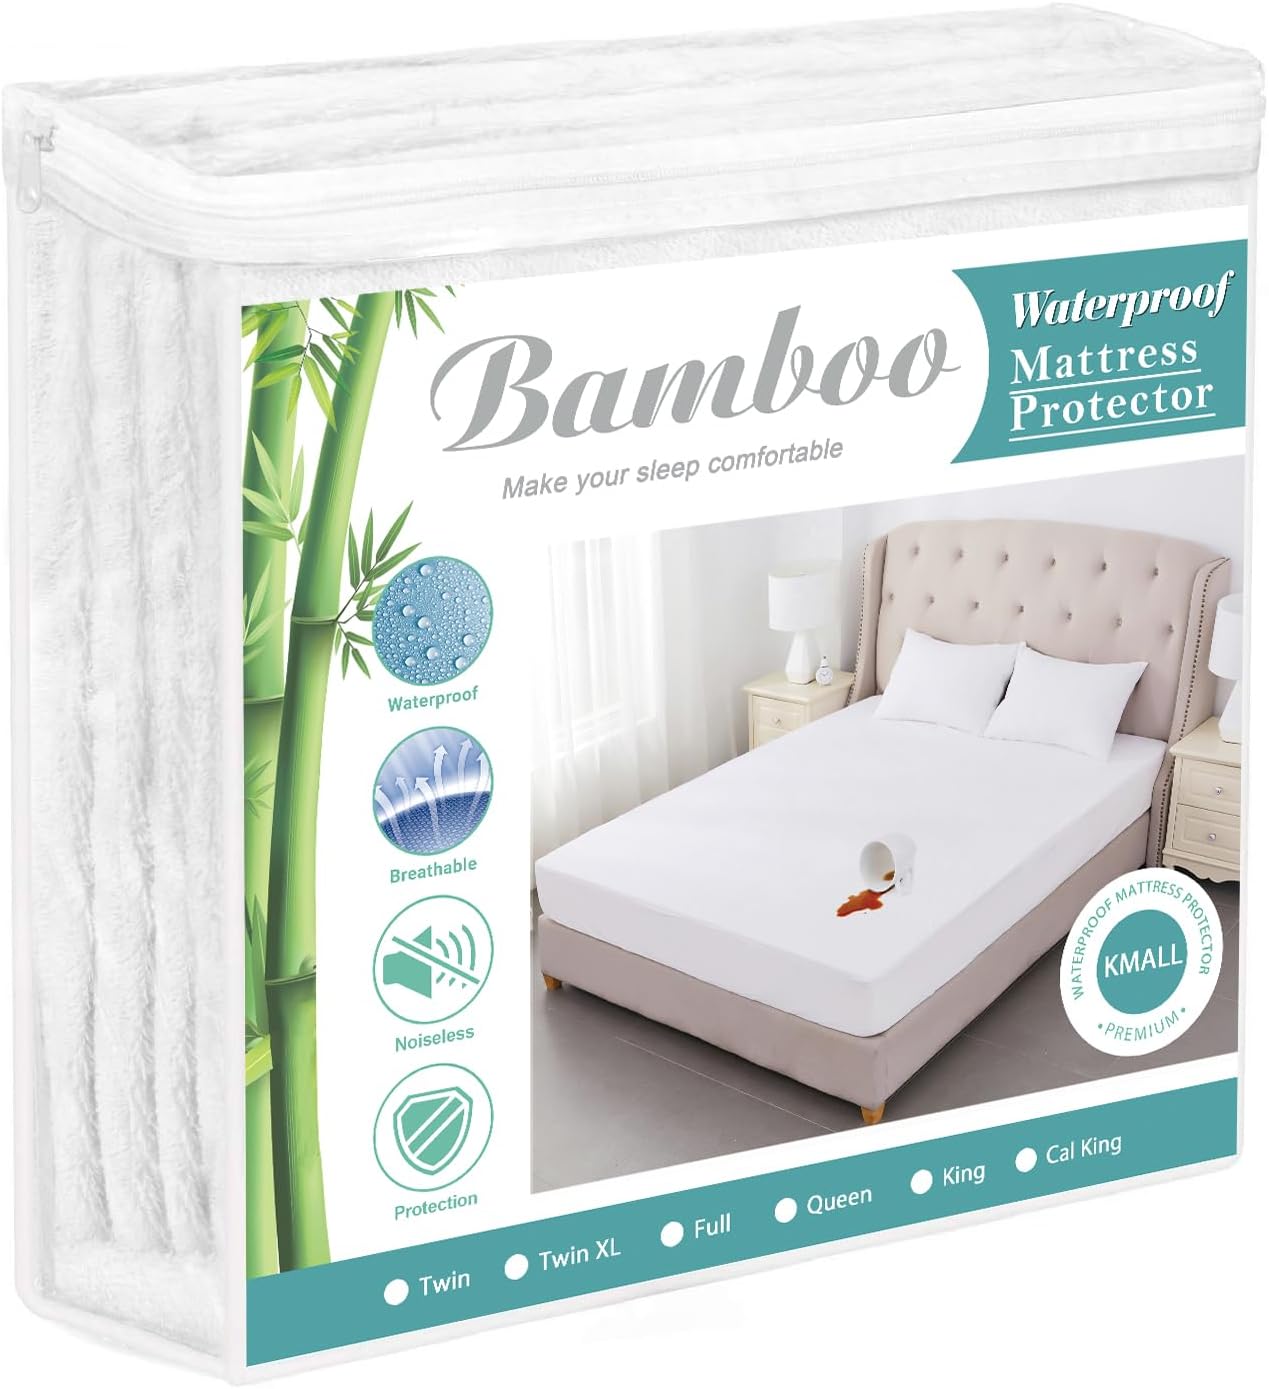 Twin Size Cooling Waterproof Mattress Protector Pad Bed Cover,Bamboo Terry Top Breathable Fitted Sheet Style Deep Pocket Soft Noiseless Waterproof Matress Protector Twin for Bed Kids Adults White